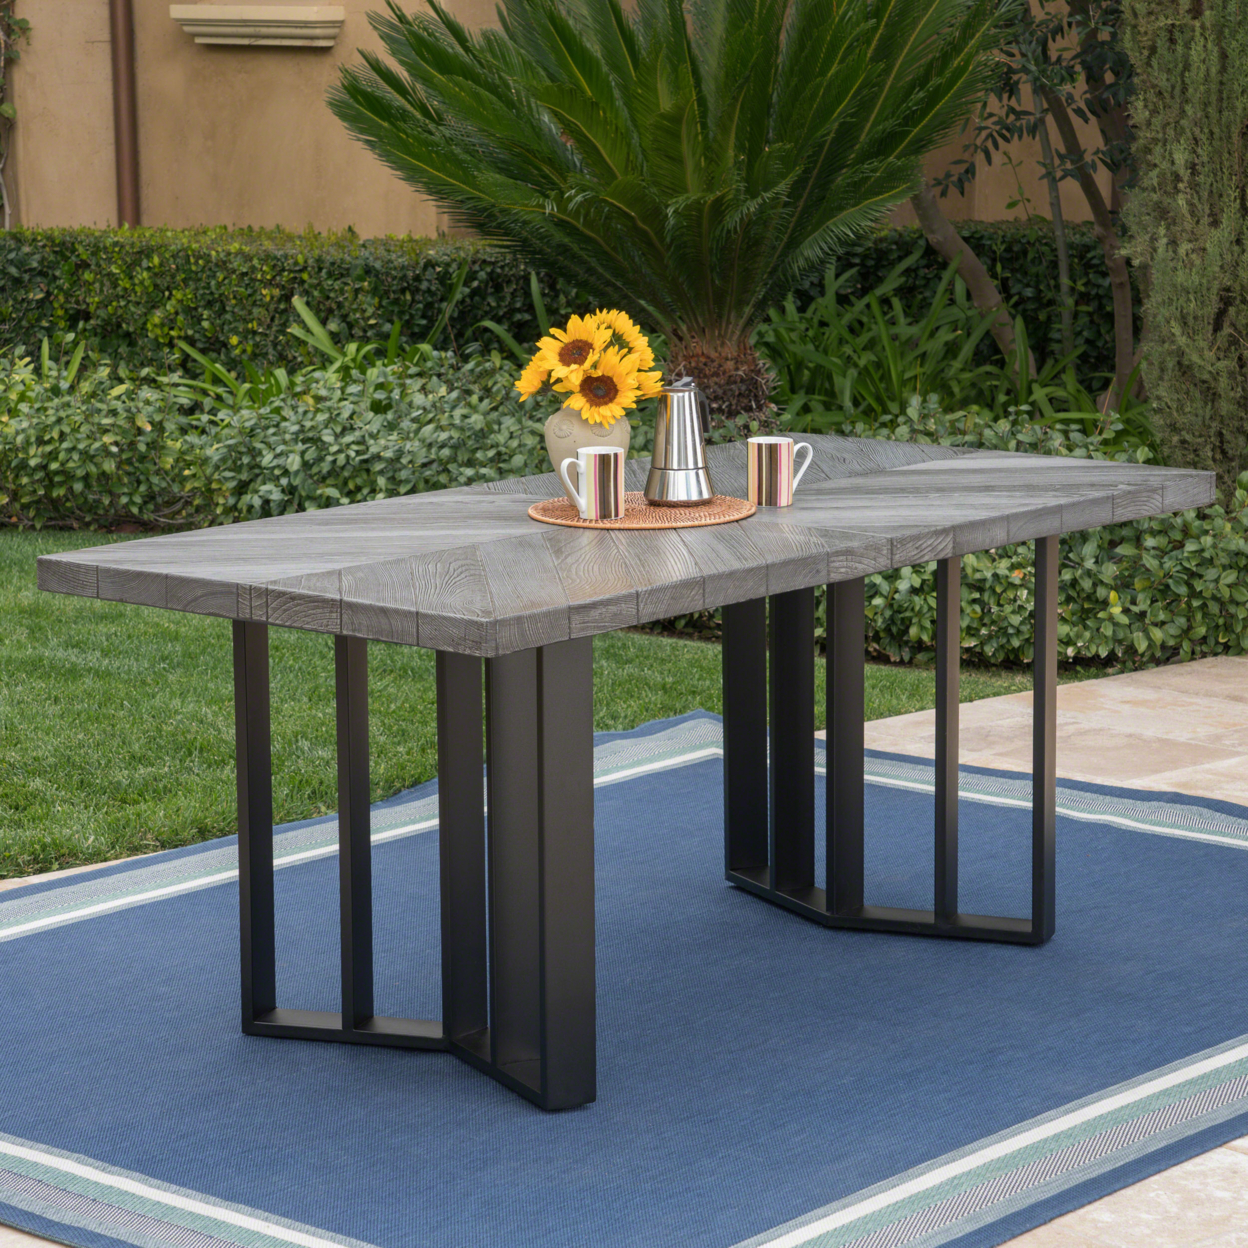 Santa Rosa Outdoor Finish Light Weight Concrete Dining Table - Textured Brown